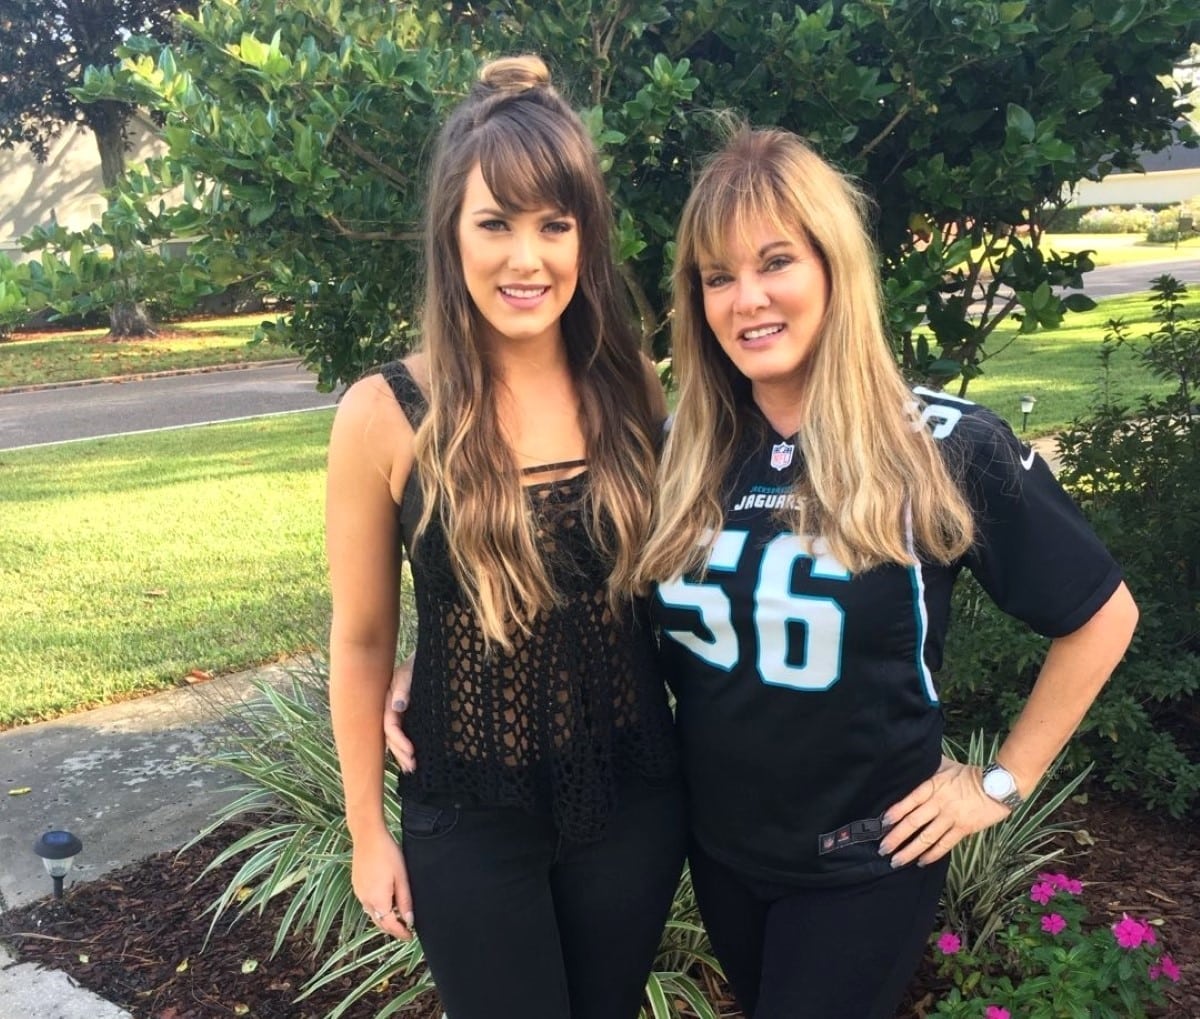 PHOTOS: RHOC Alum Jeana Keough's Daughter Kara Calls Her Out for FaceTune Fail, Demands She Take Down Pic as Fans Tell Her "This is Not Your Face"